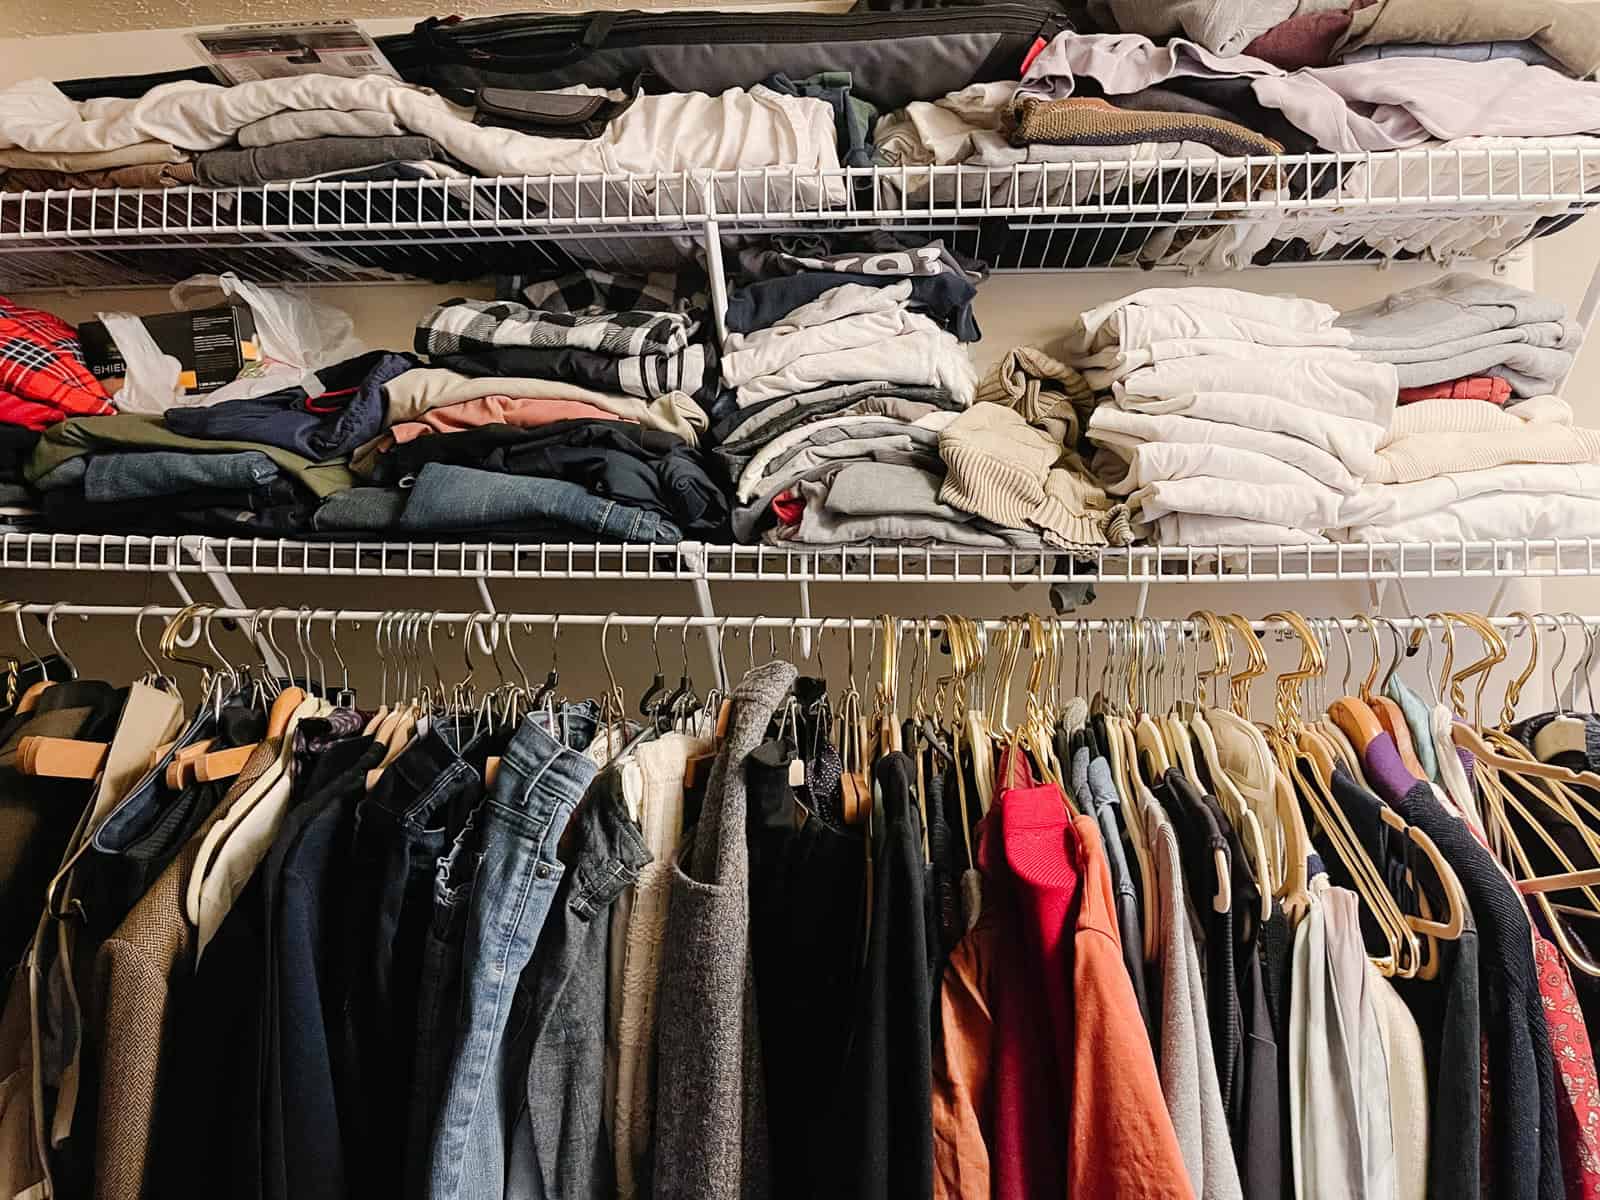 hanging and folded clothes in a closet